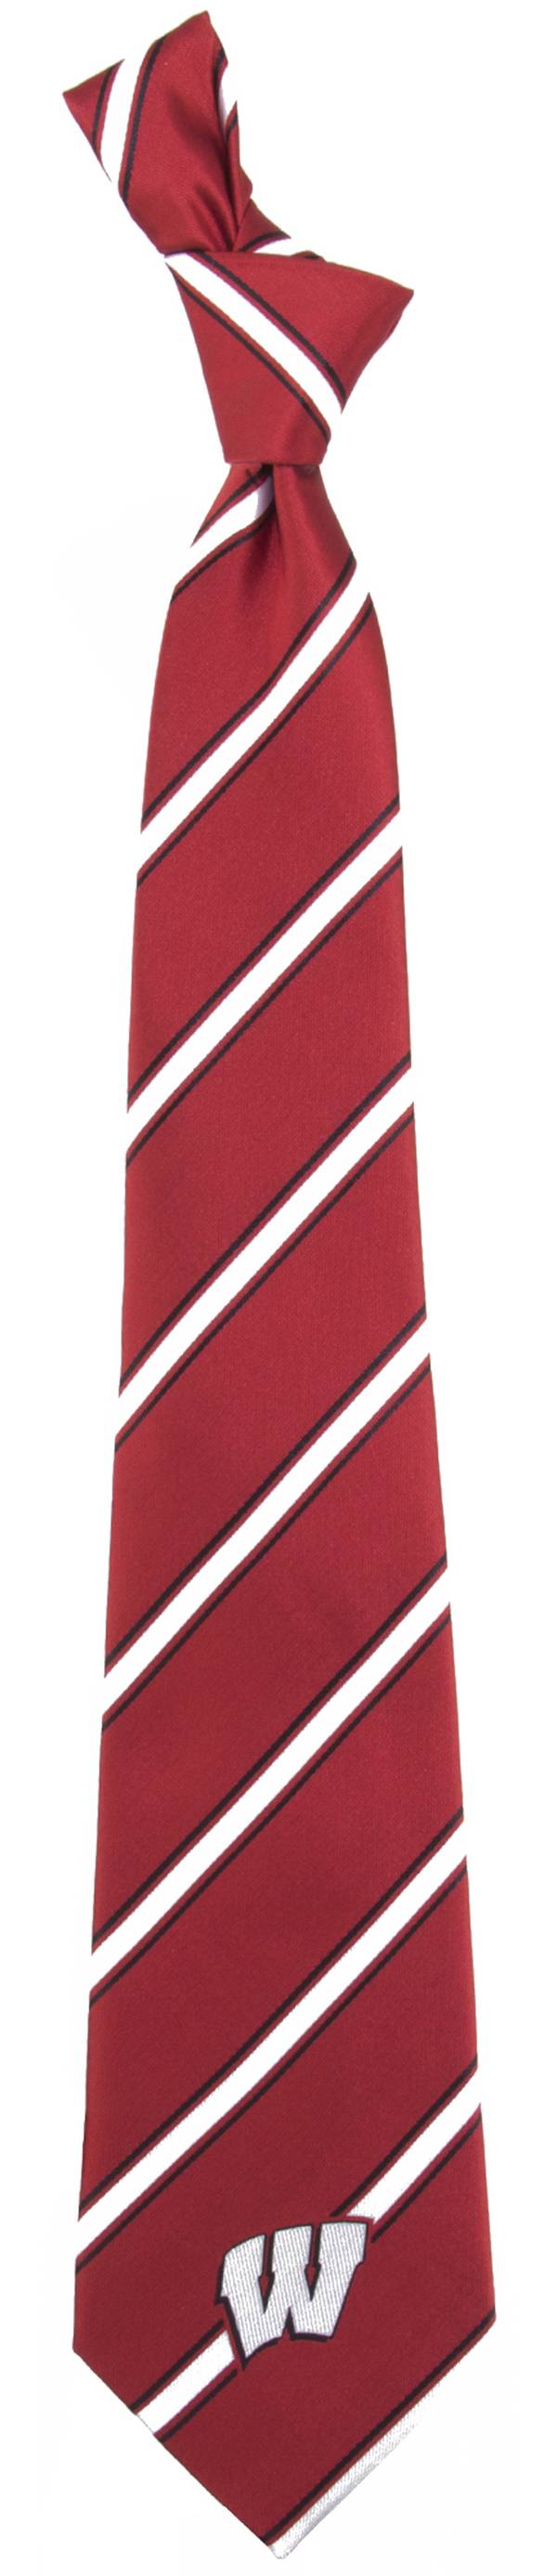 Eagles Wings Wisconsin Badgers Woven Poly 1 Necktie product image